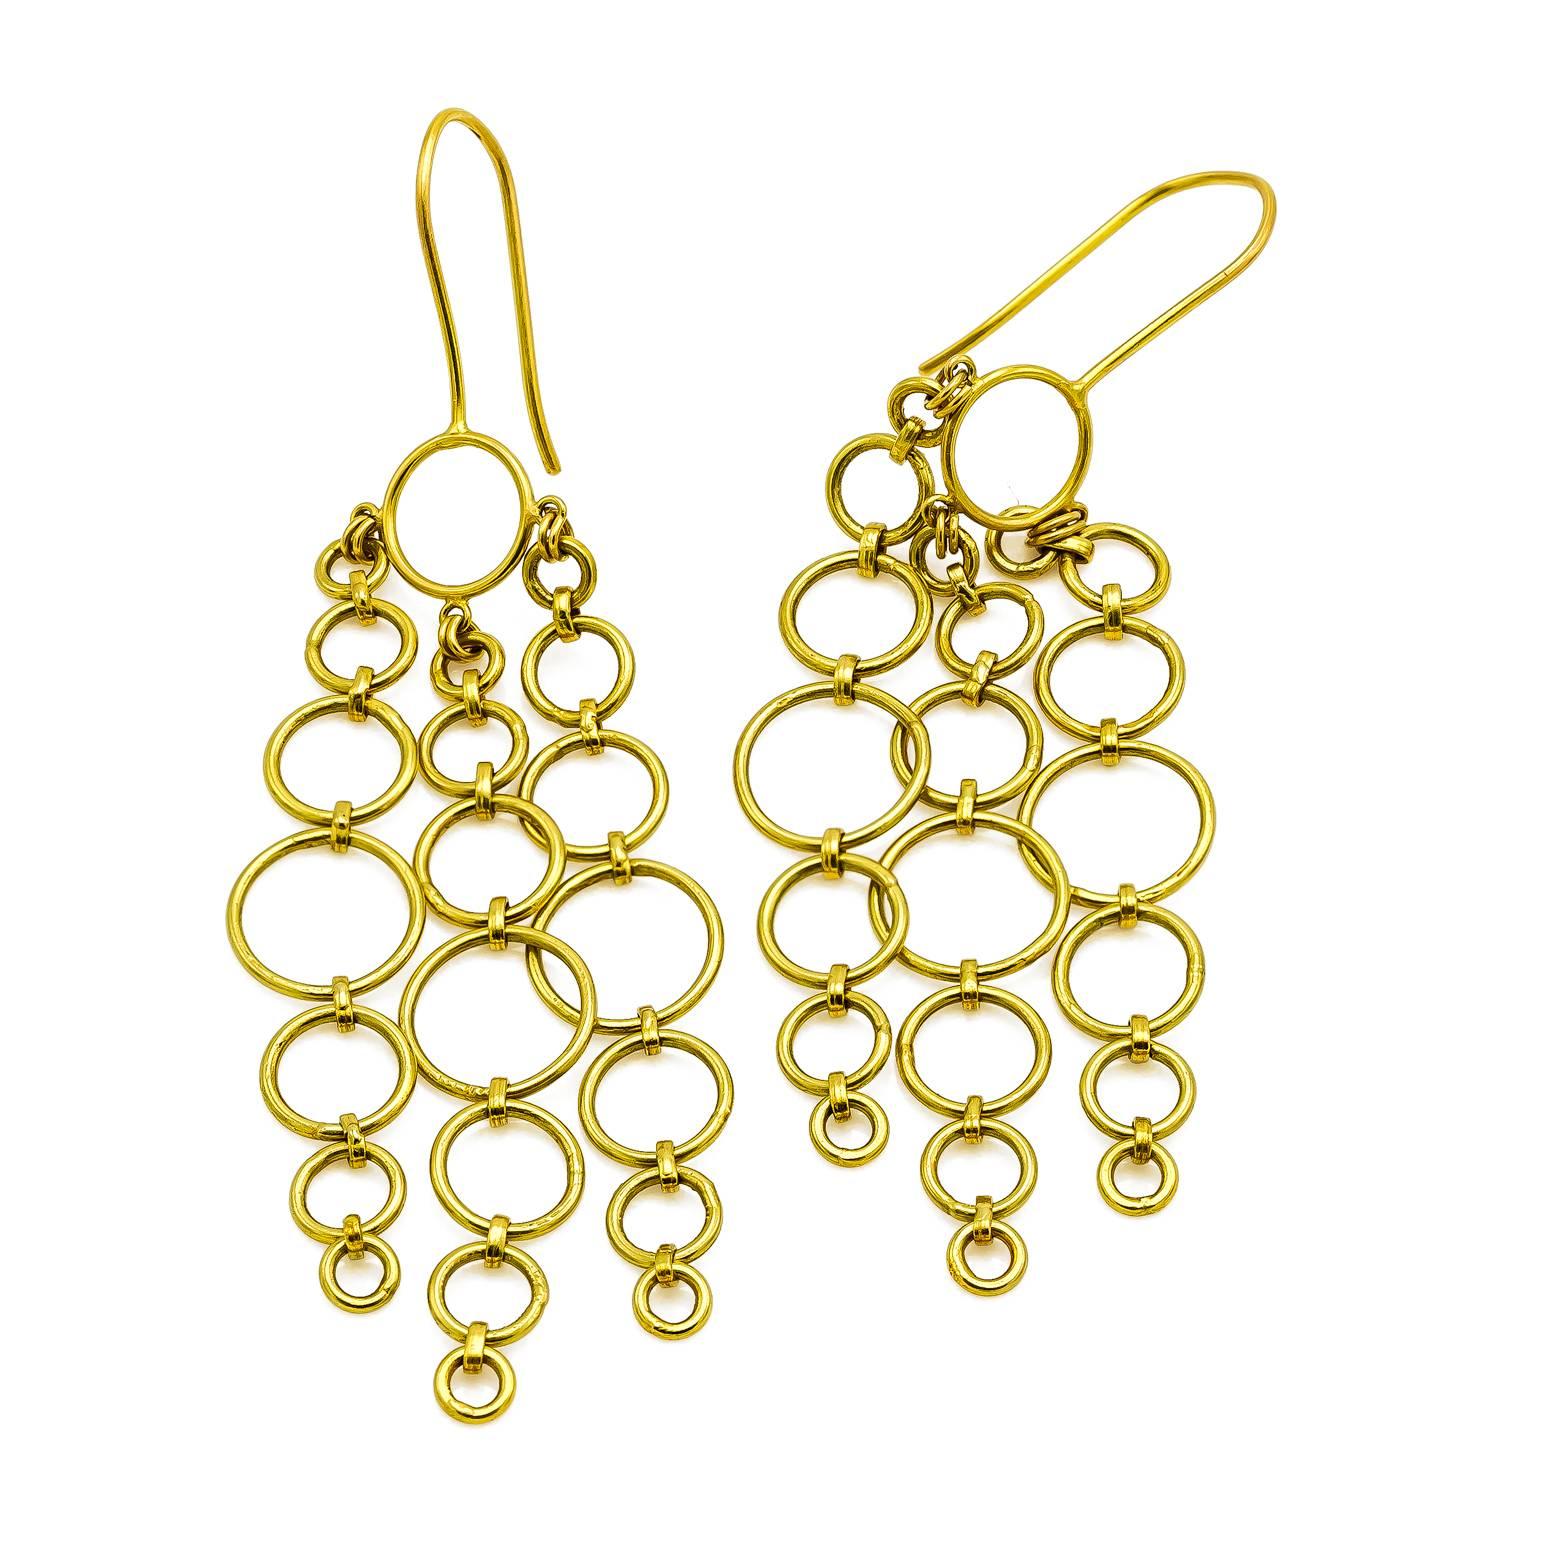 Modern Gold Chandelier Earrings Made of Hoops and Circles in 18 Karat Gold